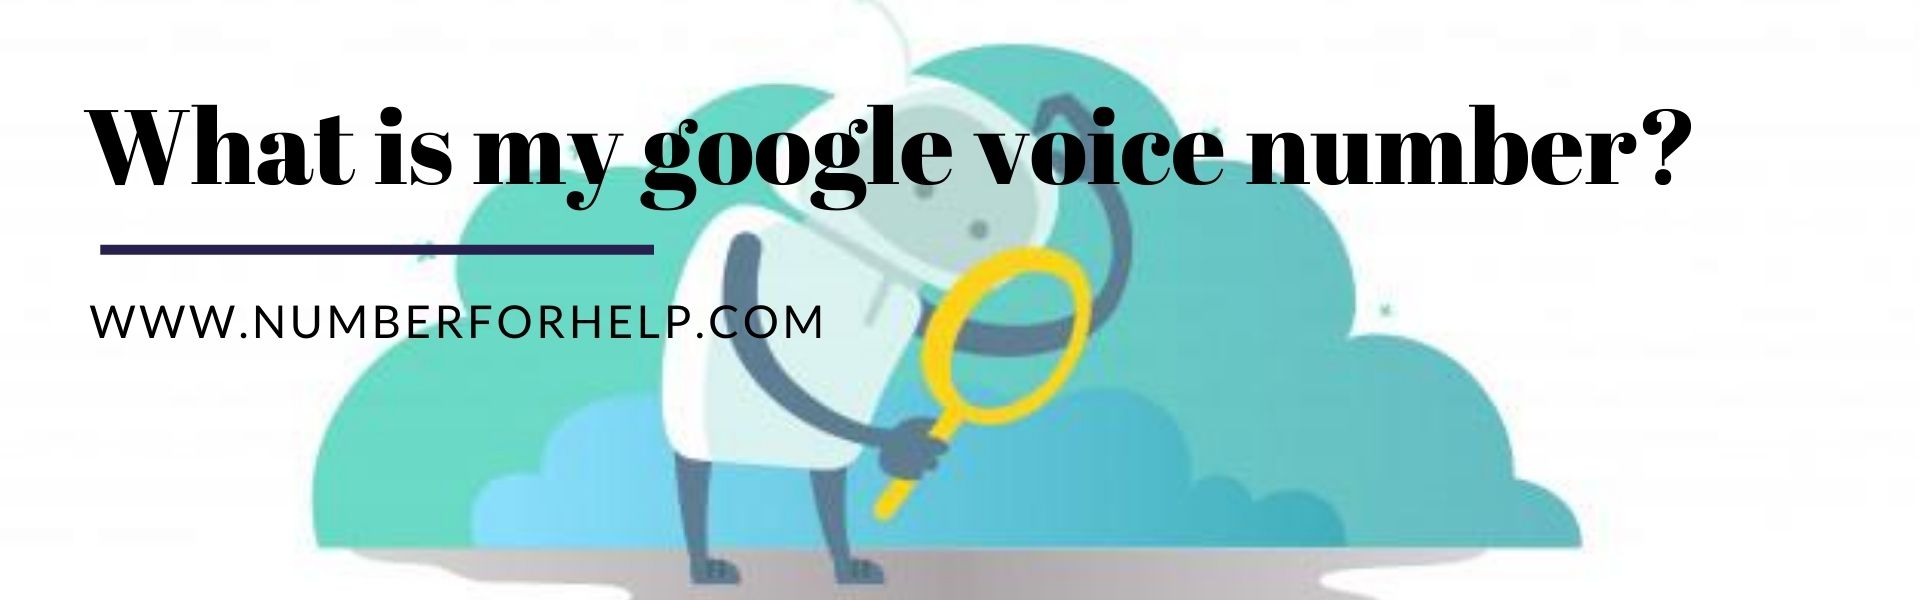 2020-08-27-08-11-35what is my google voice number